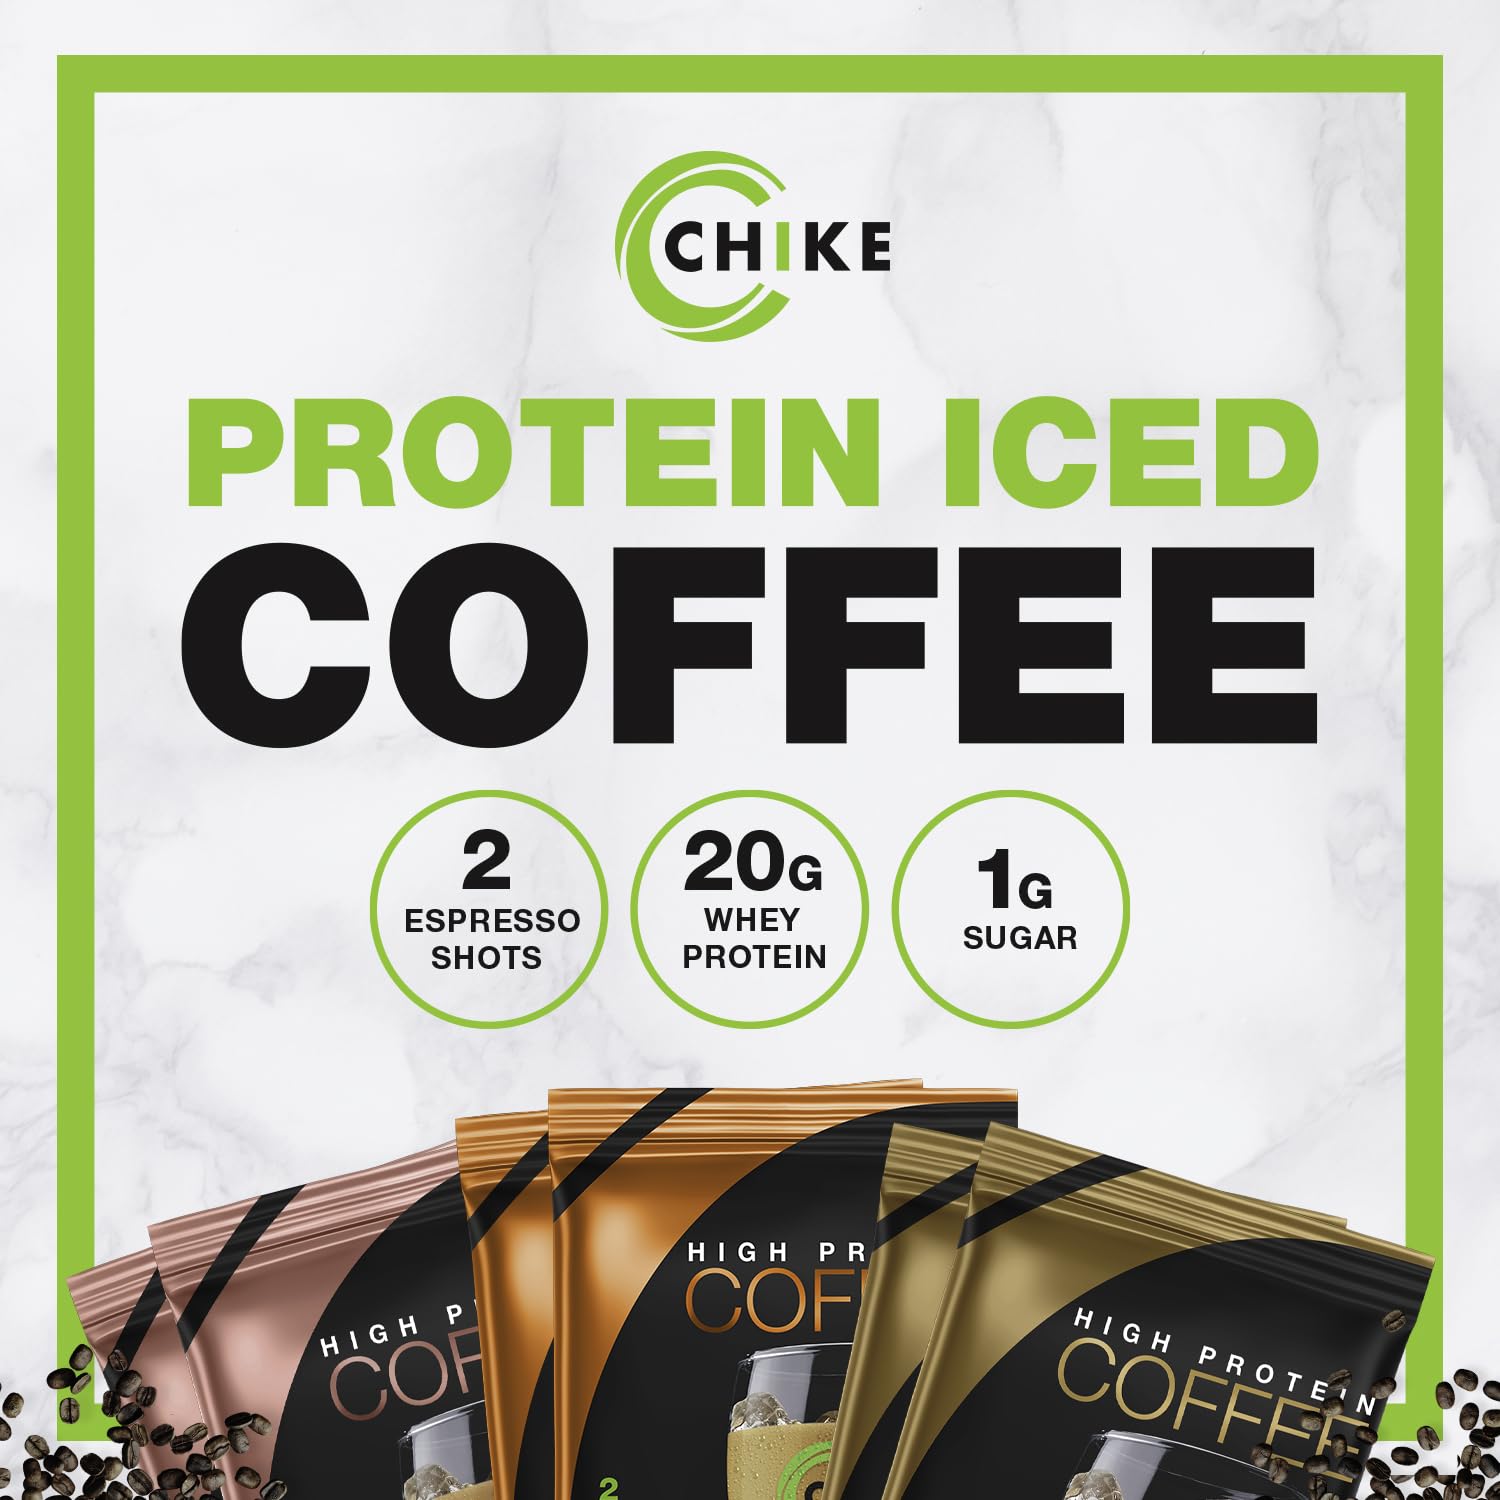 Chike Autumn Spice High Protein Iced Coffee Sampler Pack, 20 G Protein, 2 Shots Espresso, 1 G Sugar, Keto Friendly and Gluten Free, 6 Single Serve Packets : Health & Household